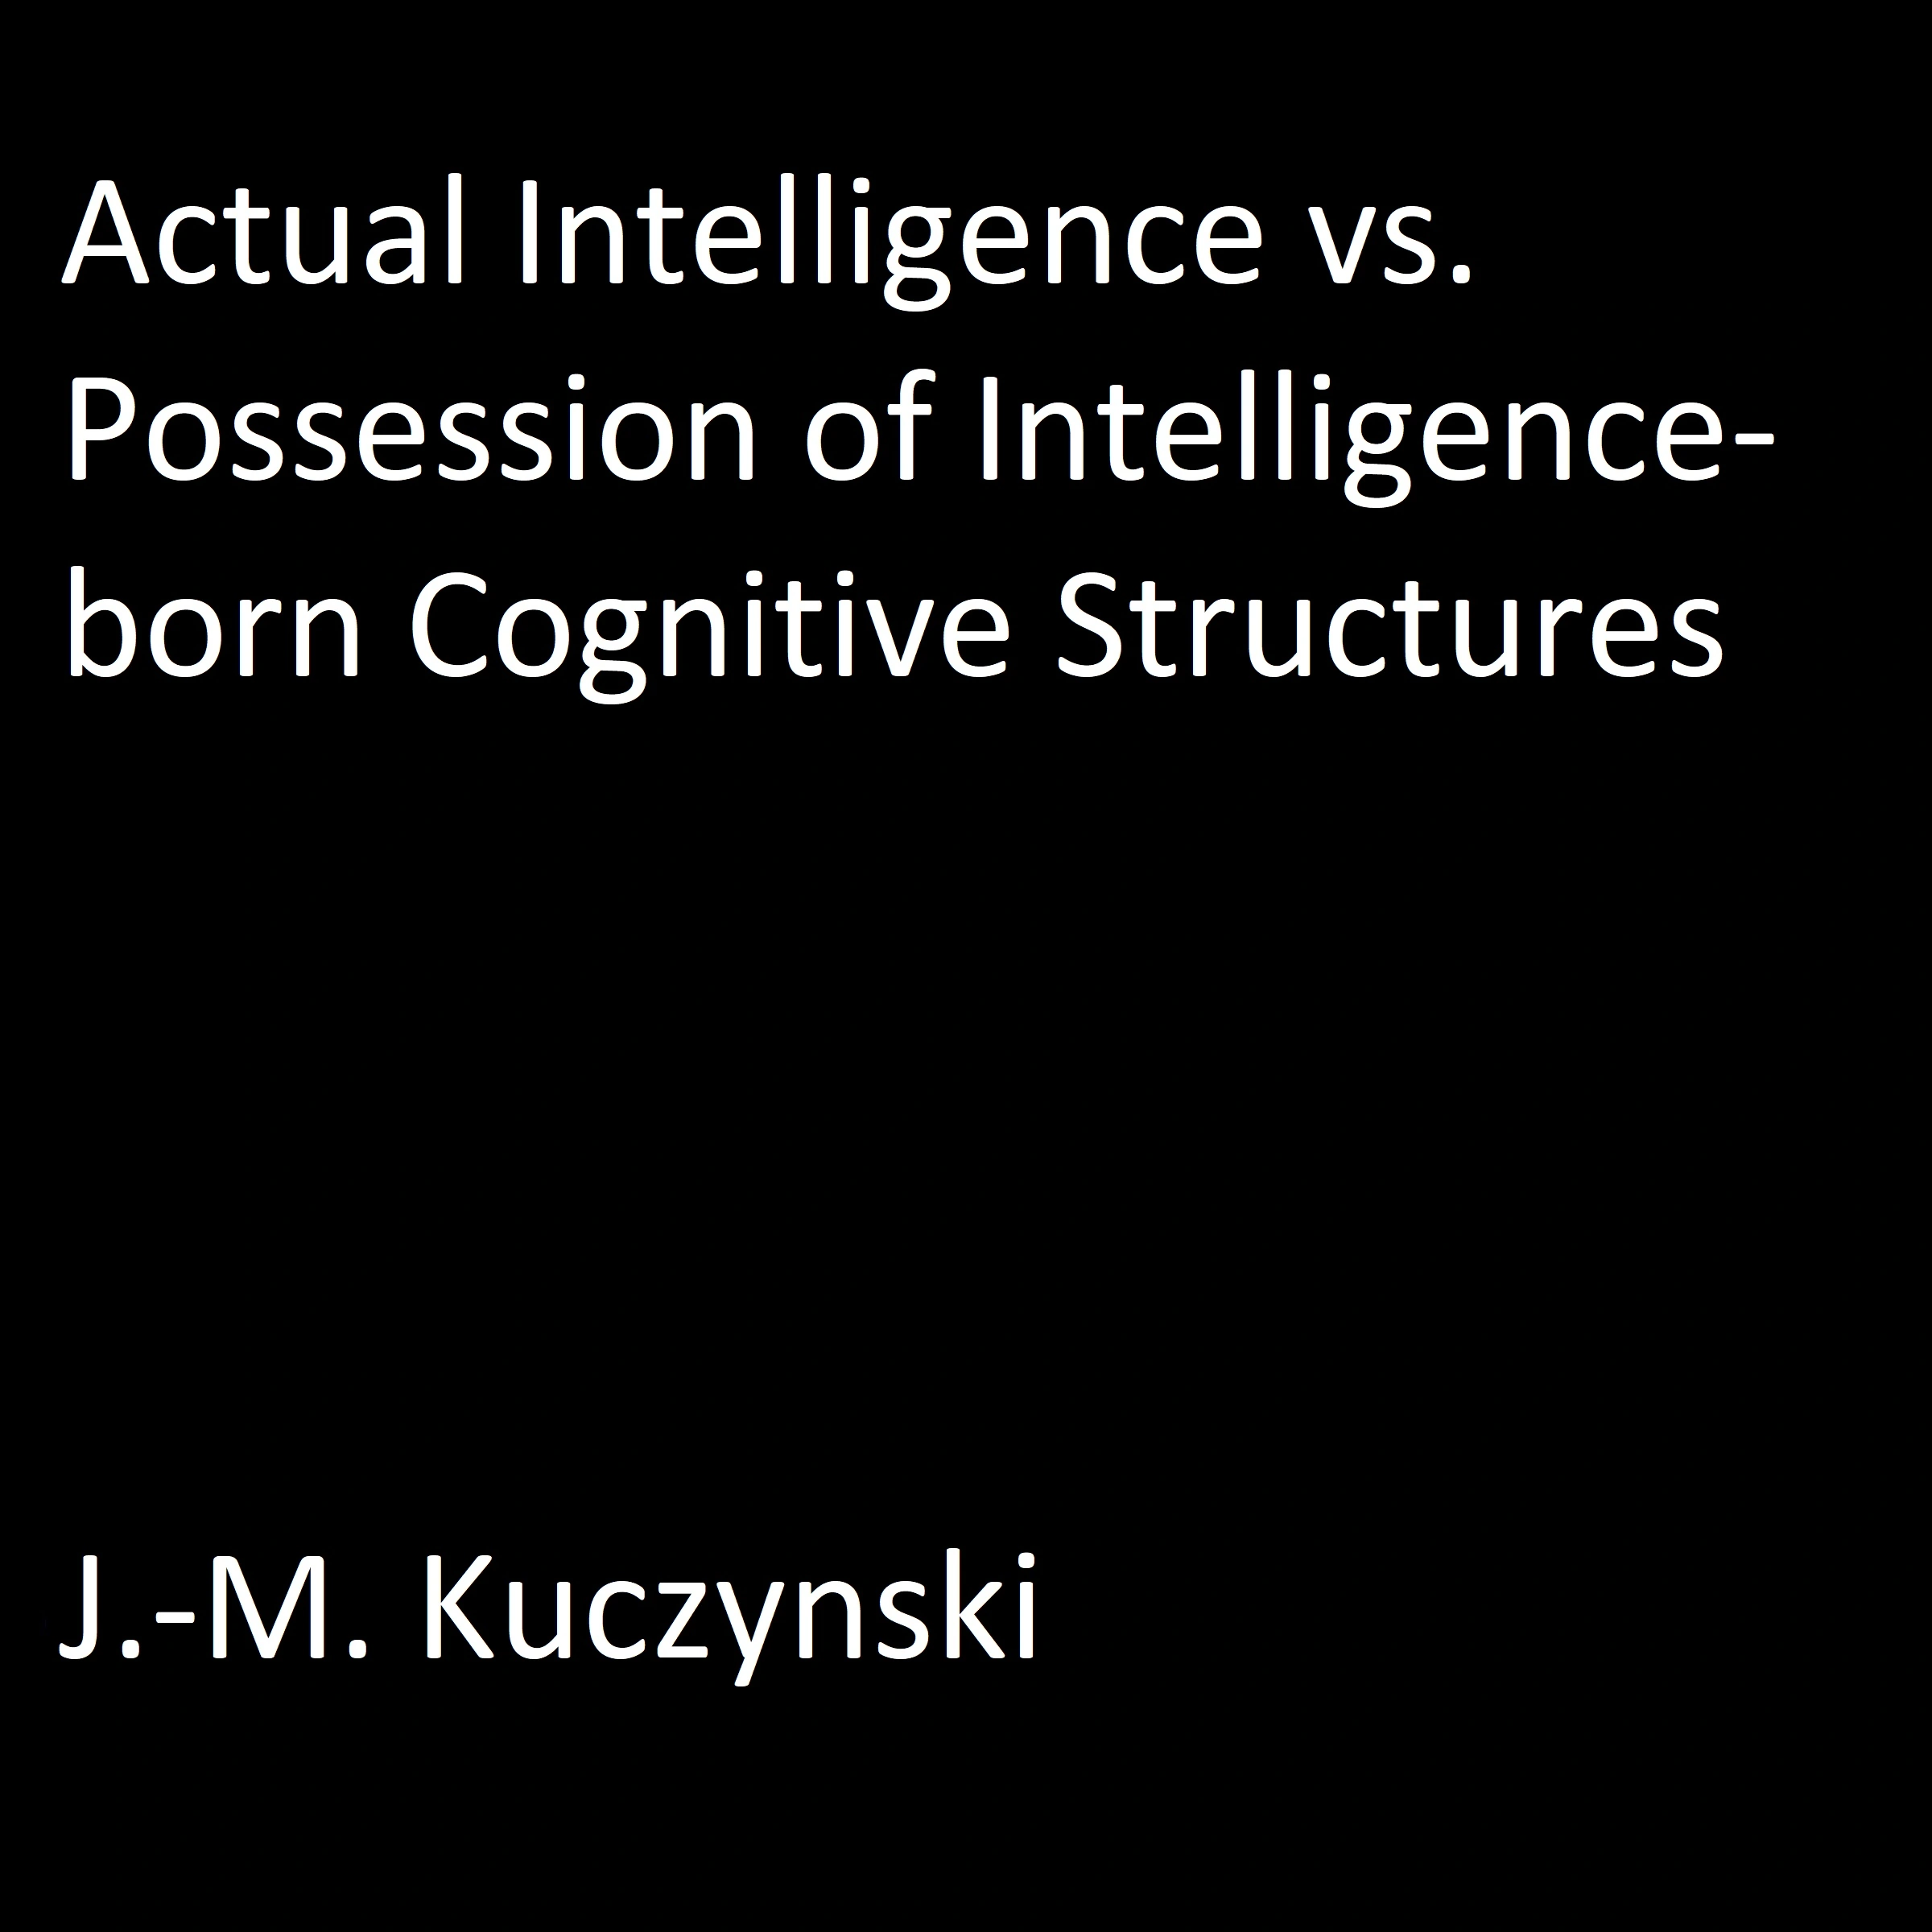 Actual Intelligence vs. Possession of Intelligence-born Cognitive Structures Audiobook by J.-M. Kuczynski